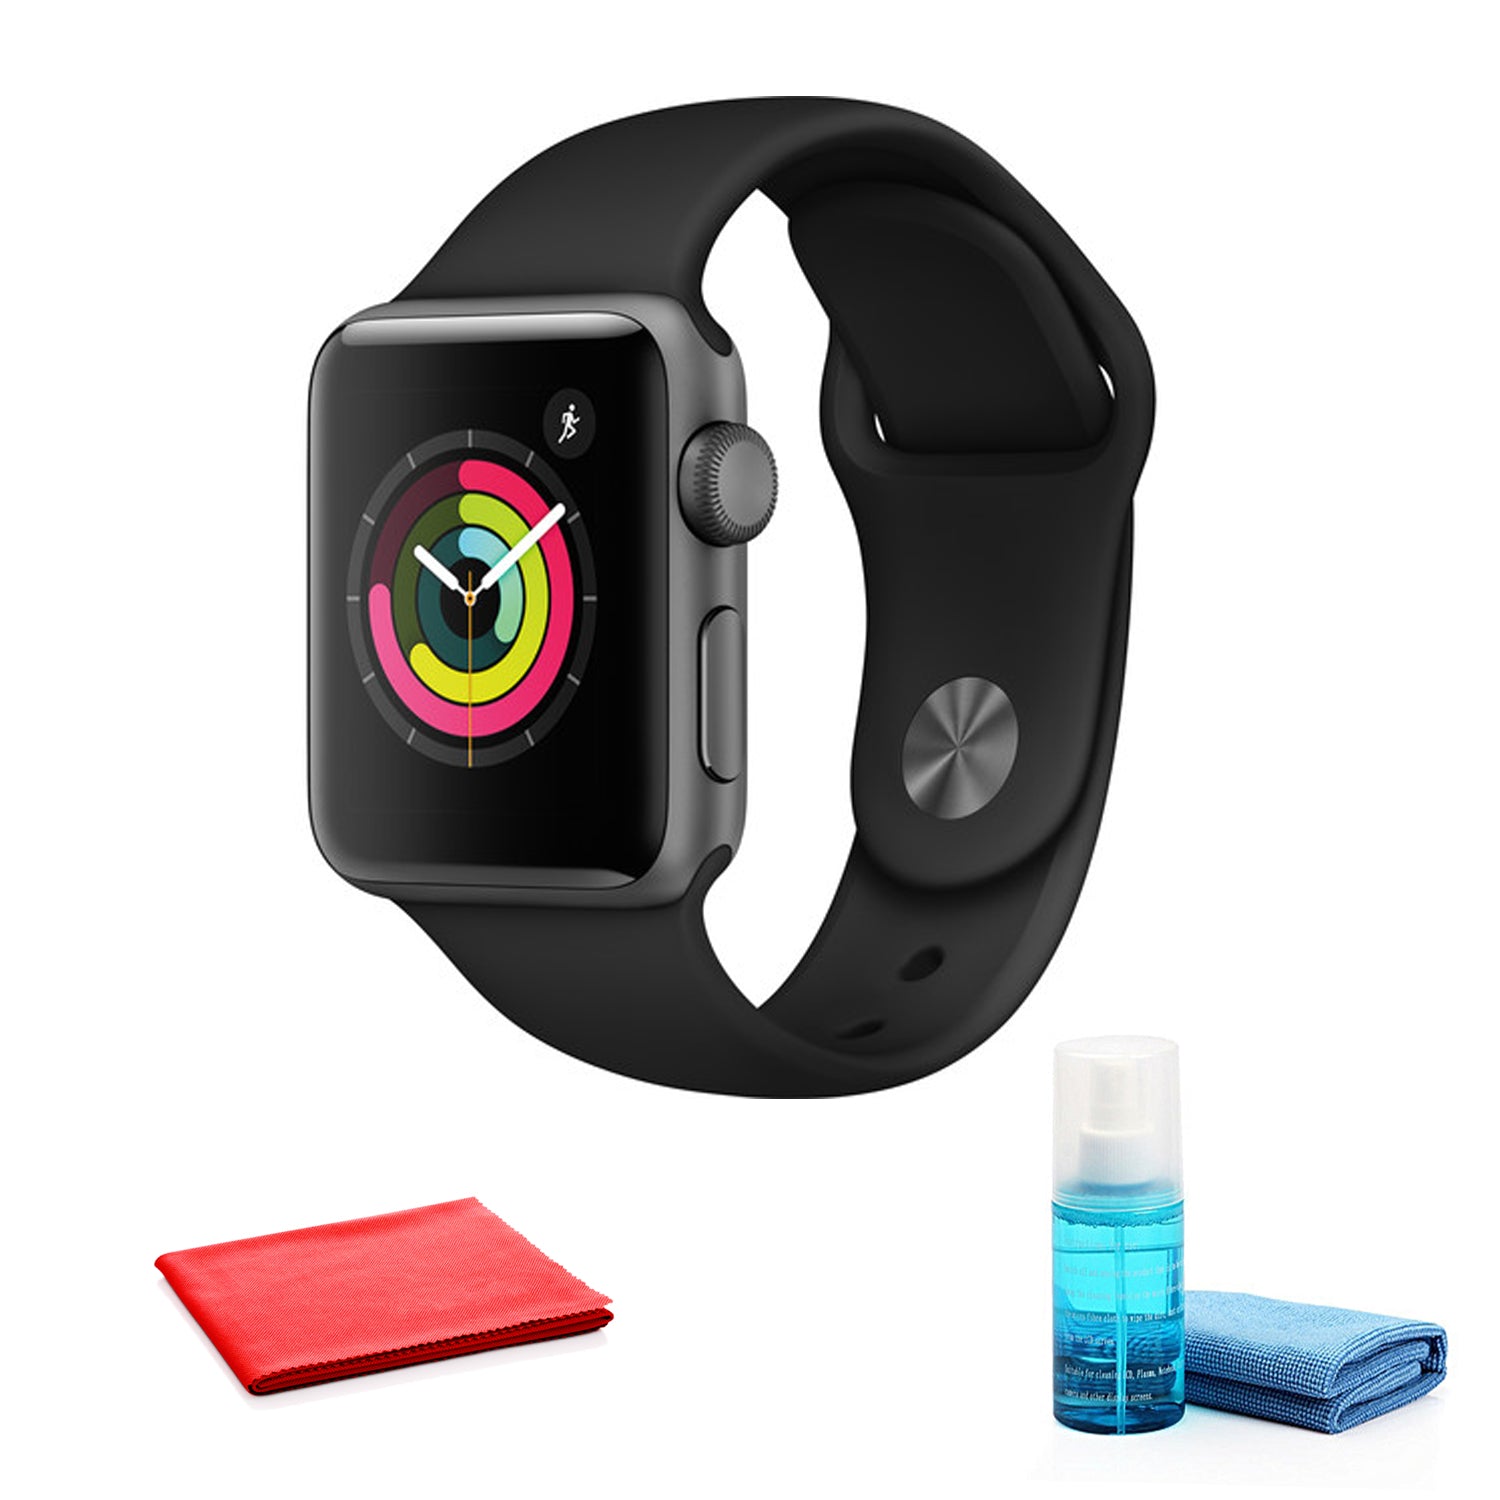 Apple Watch Series 3 GPS, 42mm Space Gray +Black Sport Band with Cleaning Kit Bundle